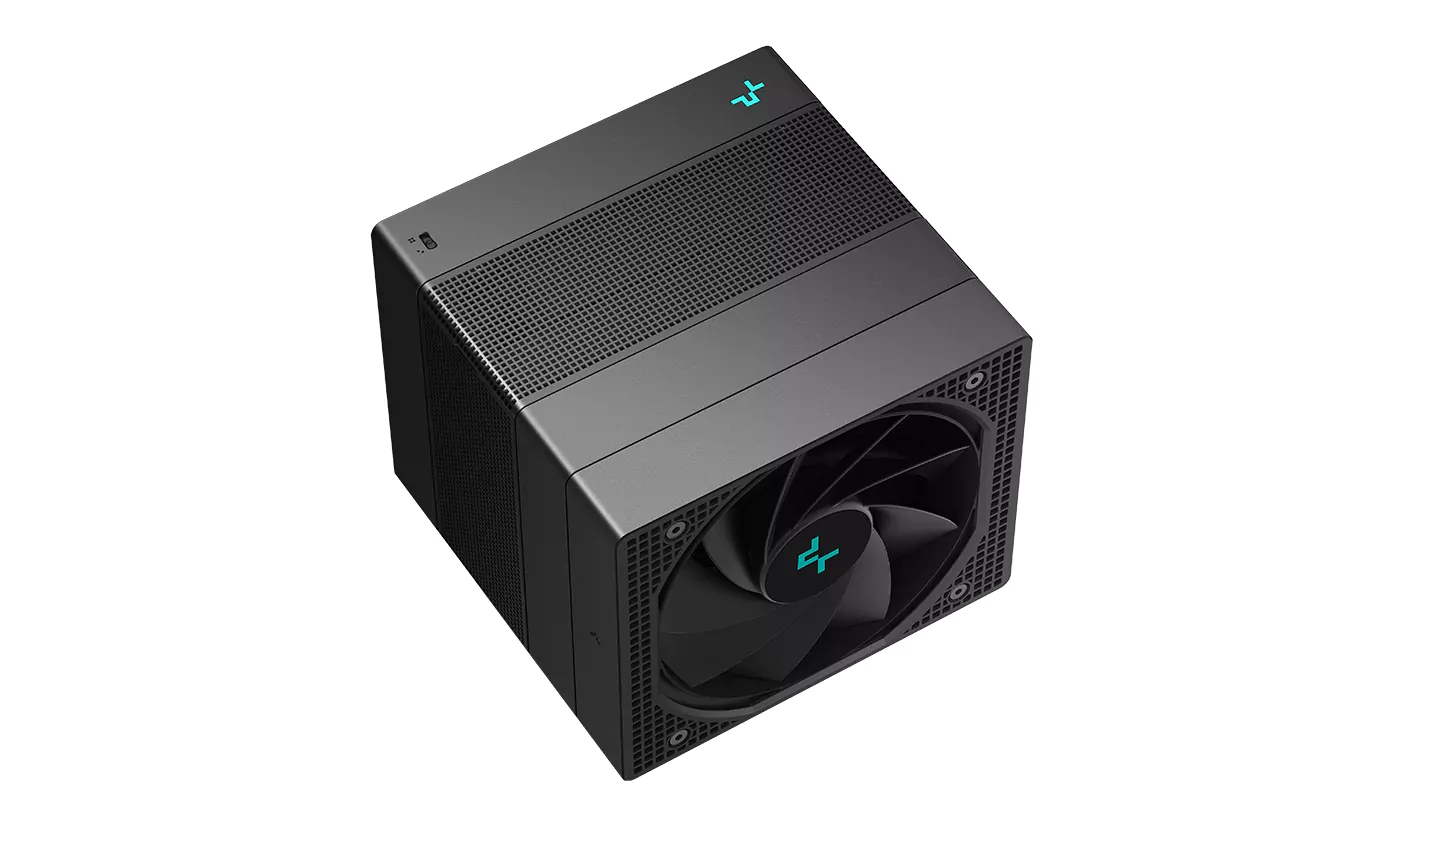 DeepCool shares more about the Assassin IV dual-tower CPU cooler